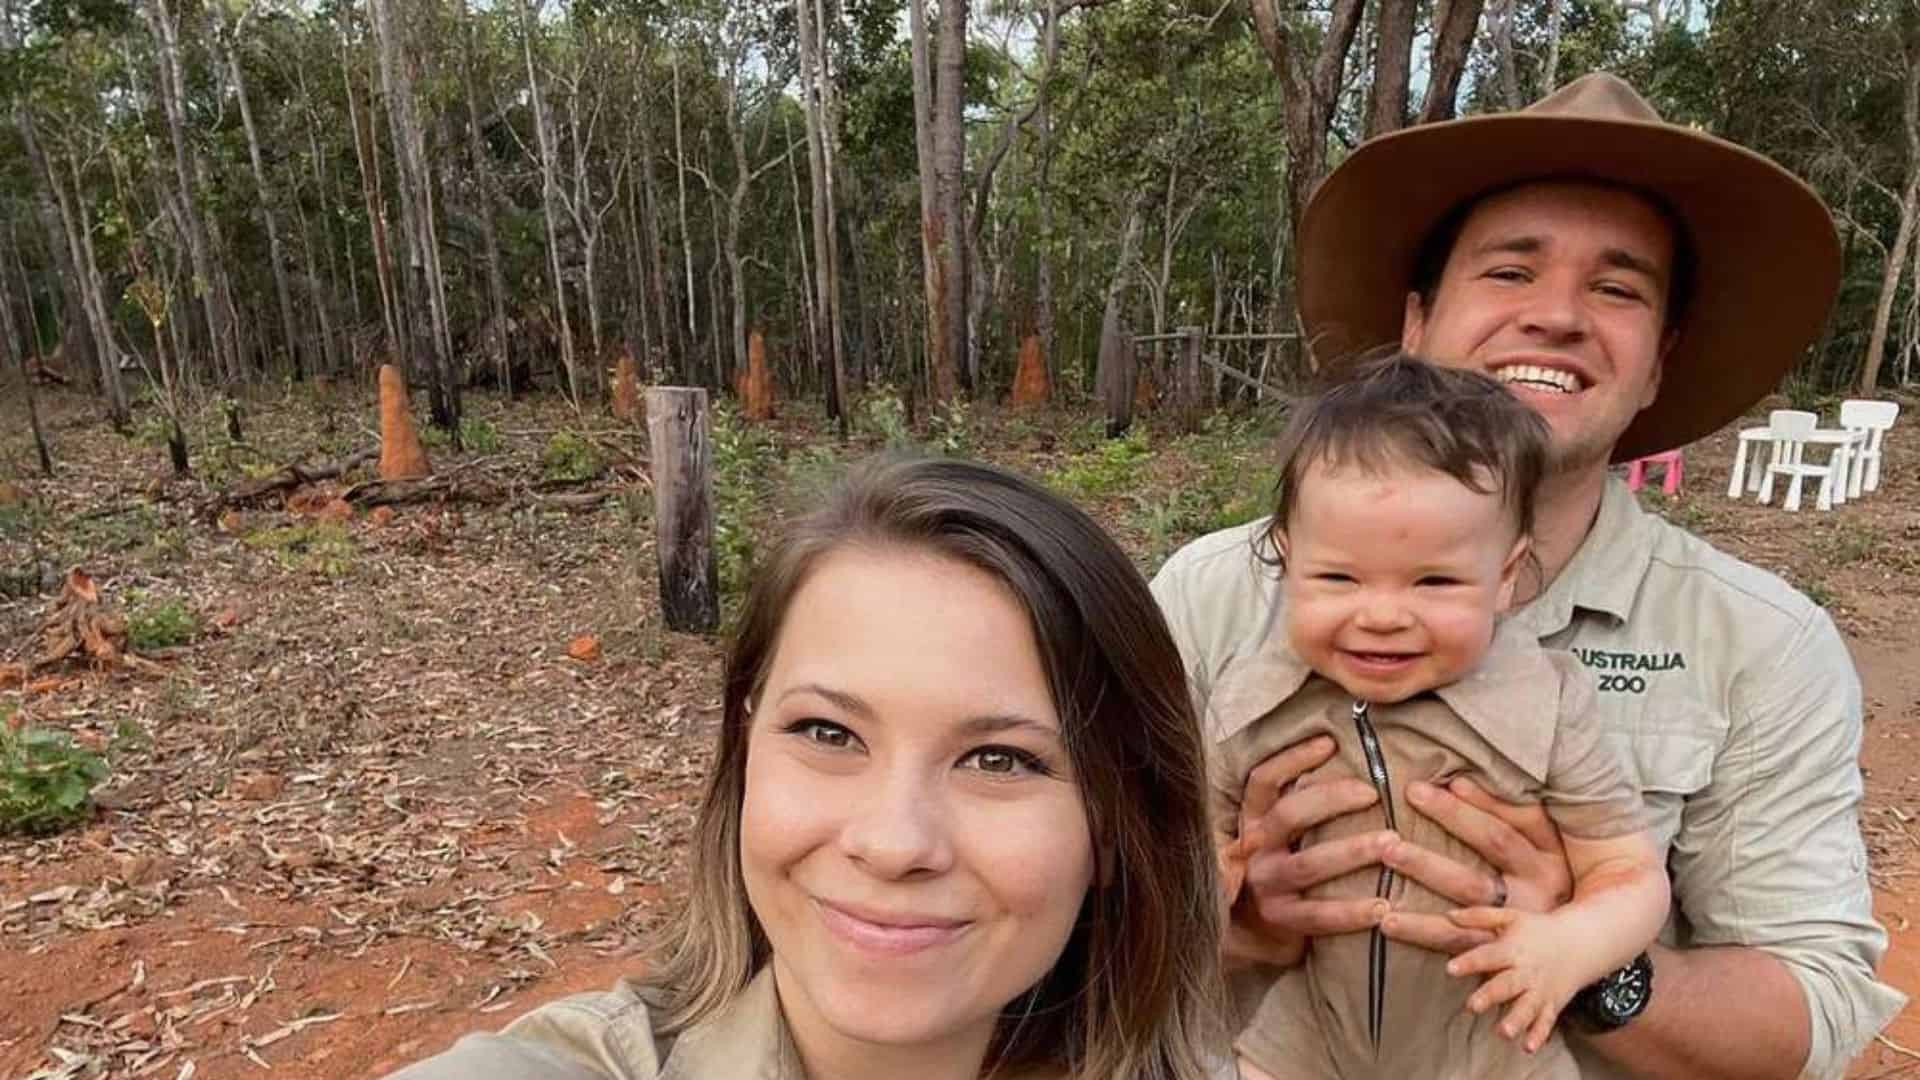 Bindi Irwin and Chandler Powell with her daughter